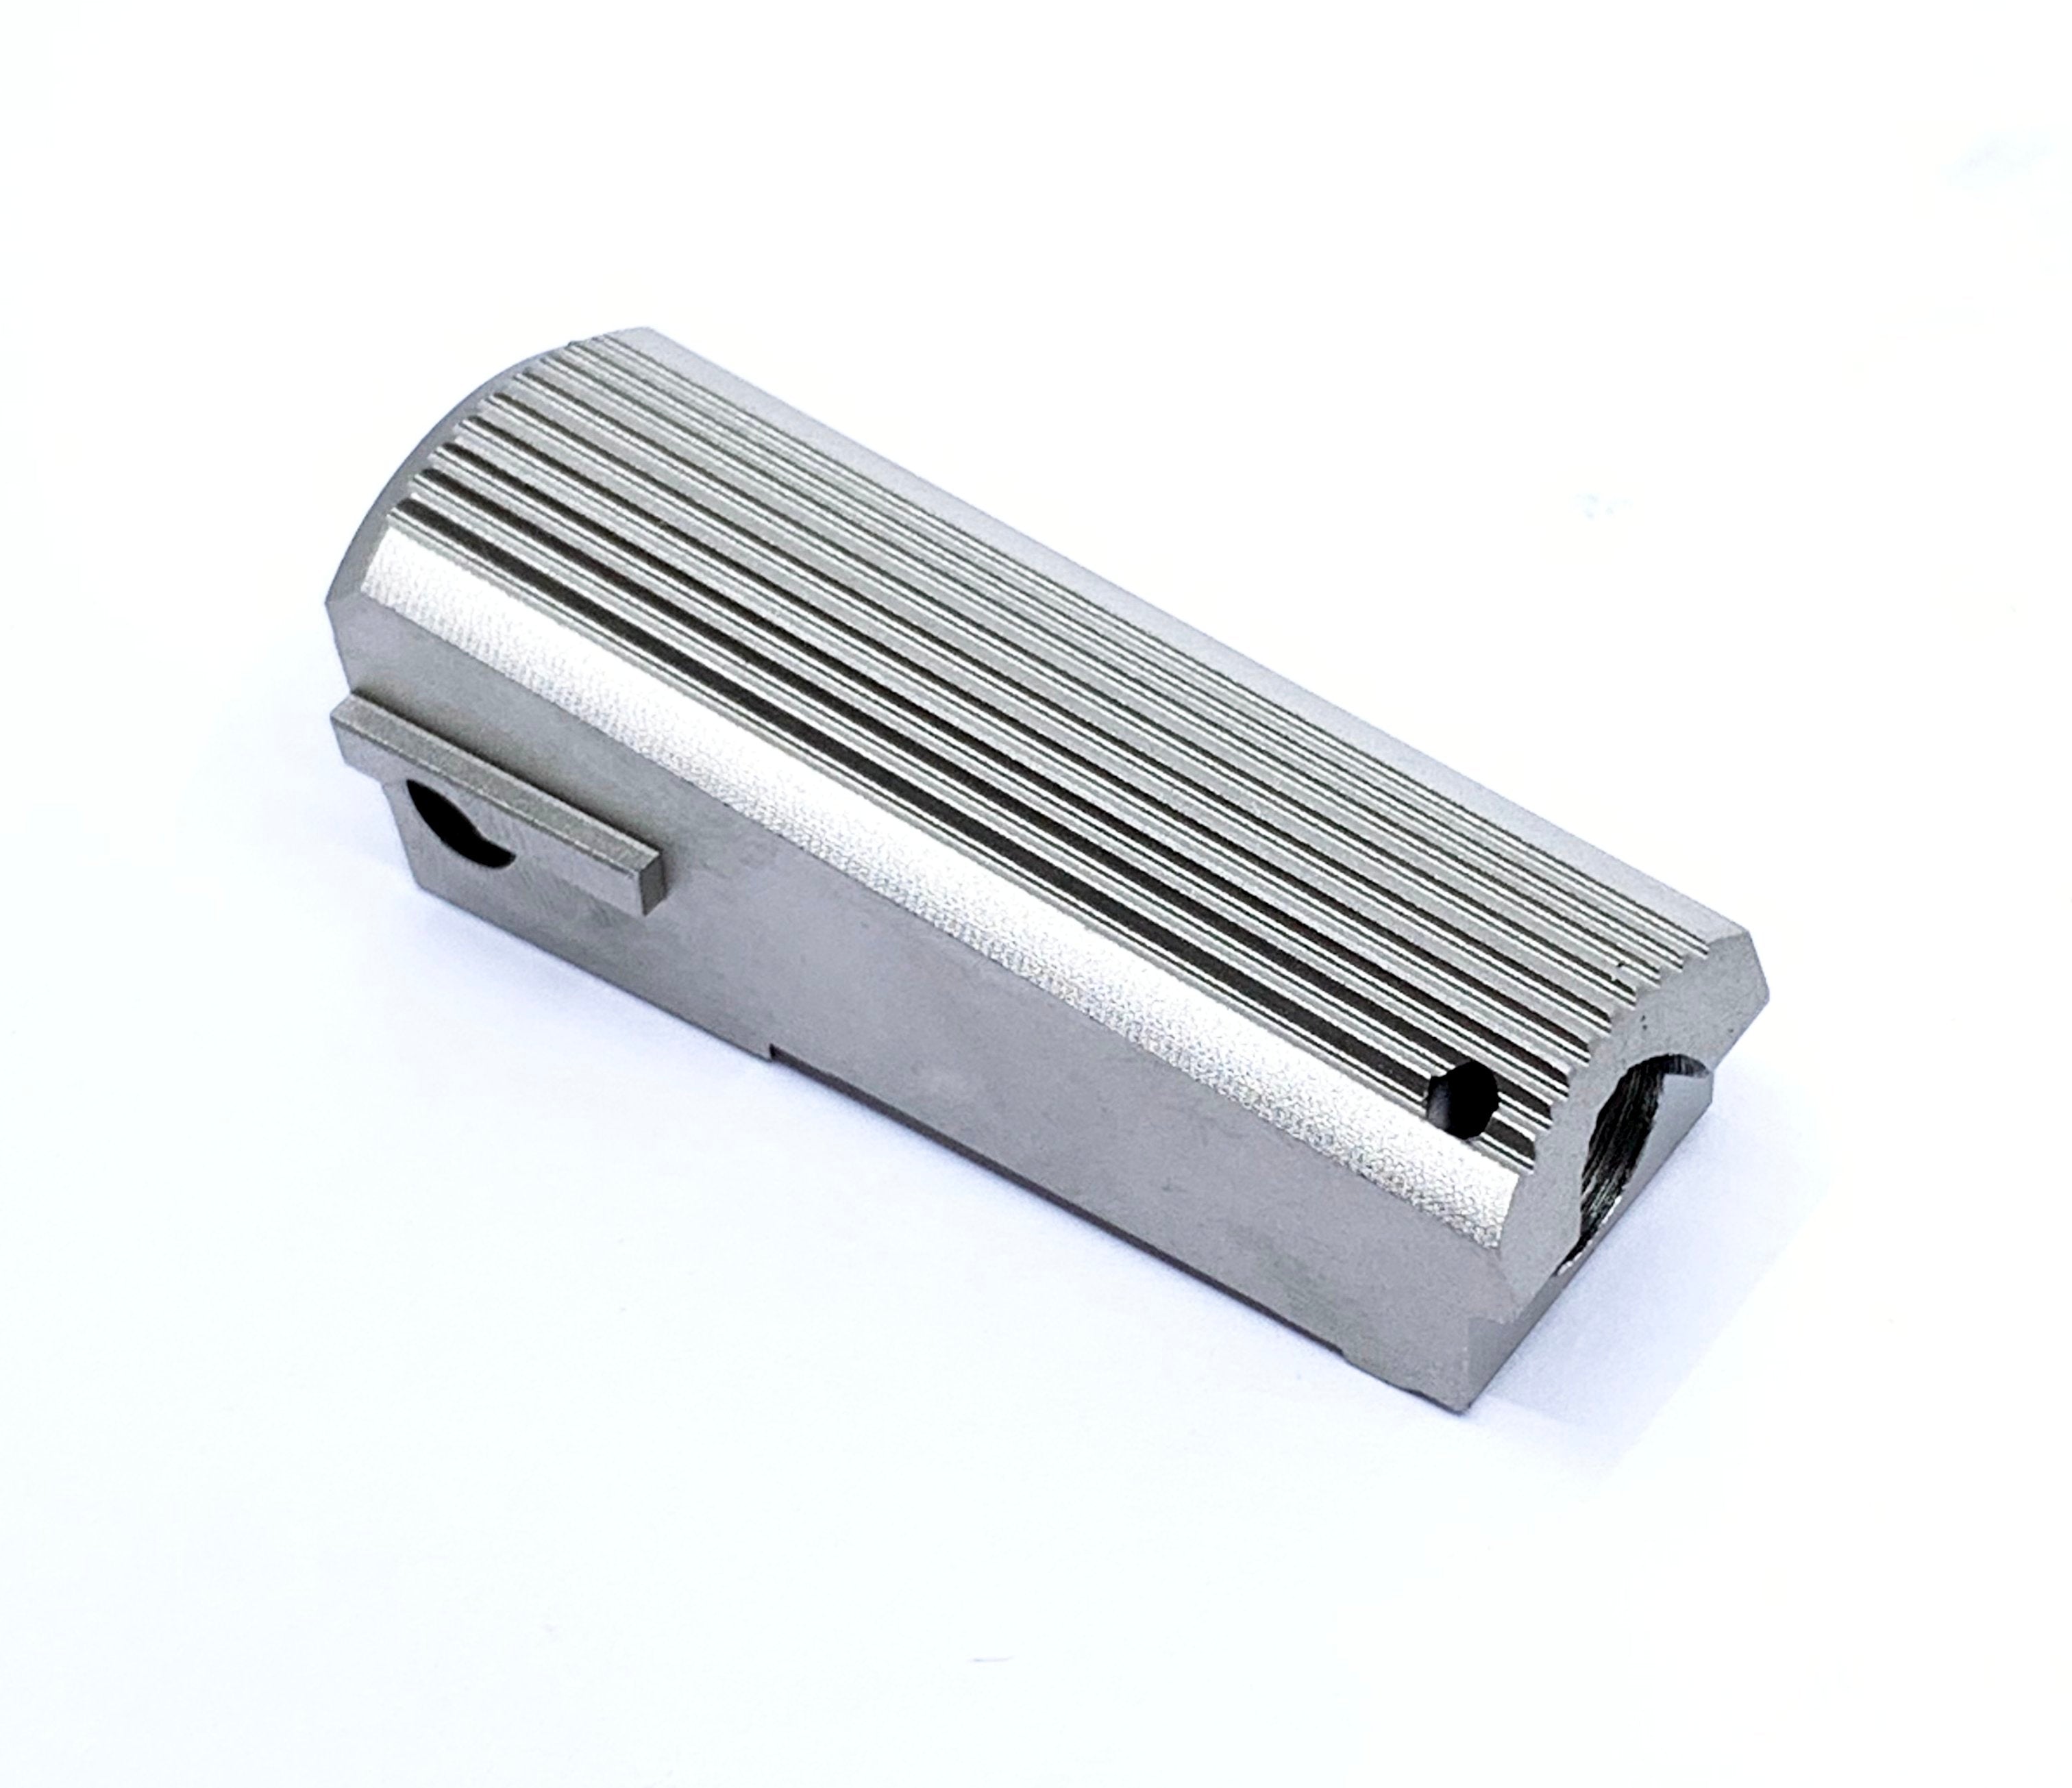 Pro Arms Full CNC Stainless Steel Spring Housing (Silver) - Tokyo Marui V10